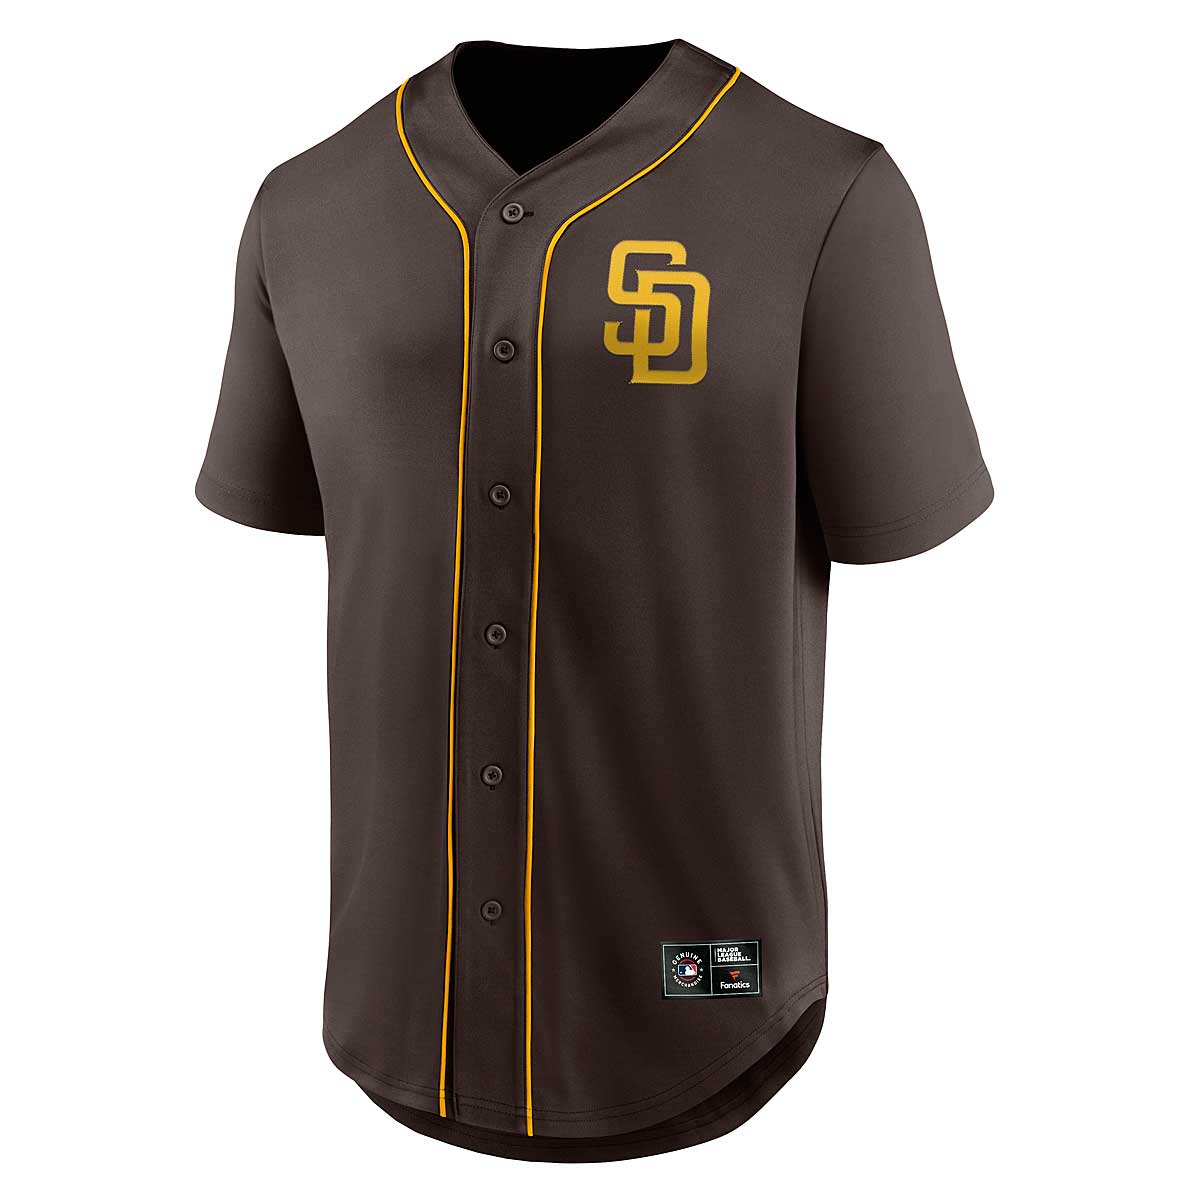 Image of Fanatics MLB San Diego Padres Foundation Jersey, Brown/yellow Gold